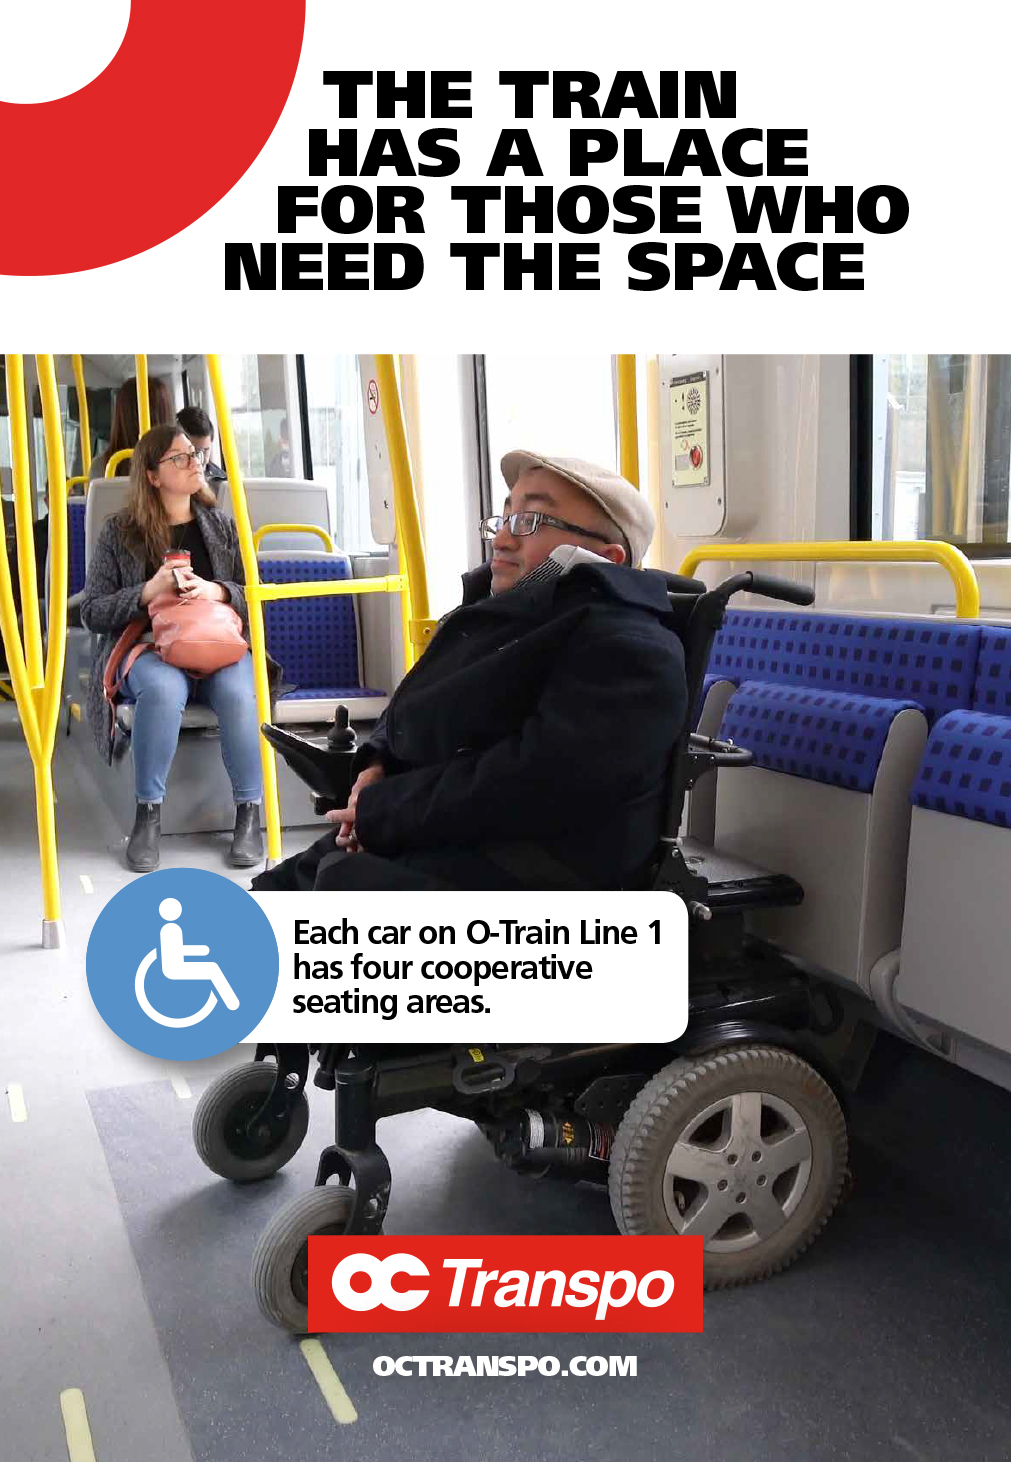 A man in an electric wheelchair in the train's Cooperative seating section. Image text: The train has a place for those who need the space. Each car on O-Train Line 1 has four cooperative seating areas.